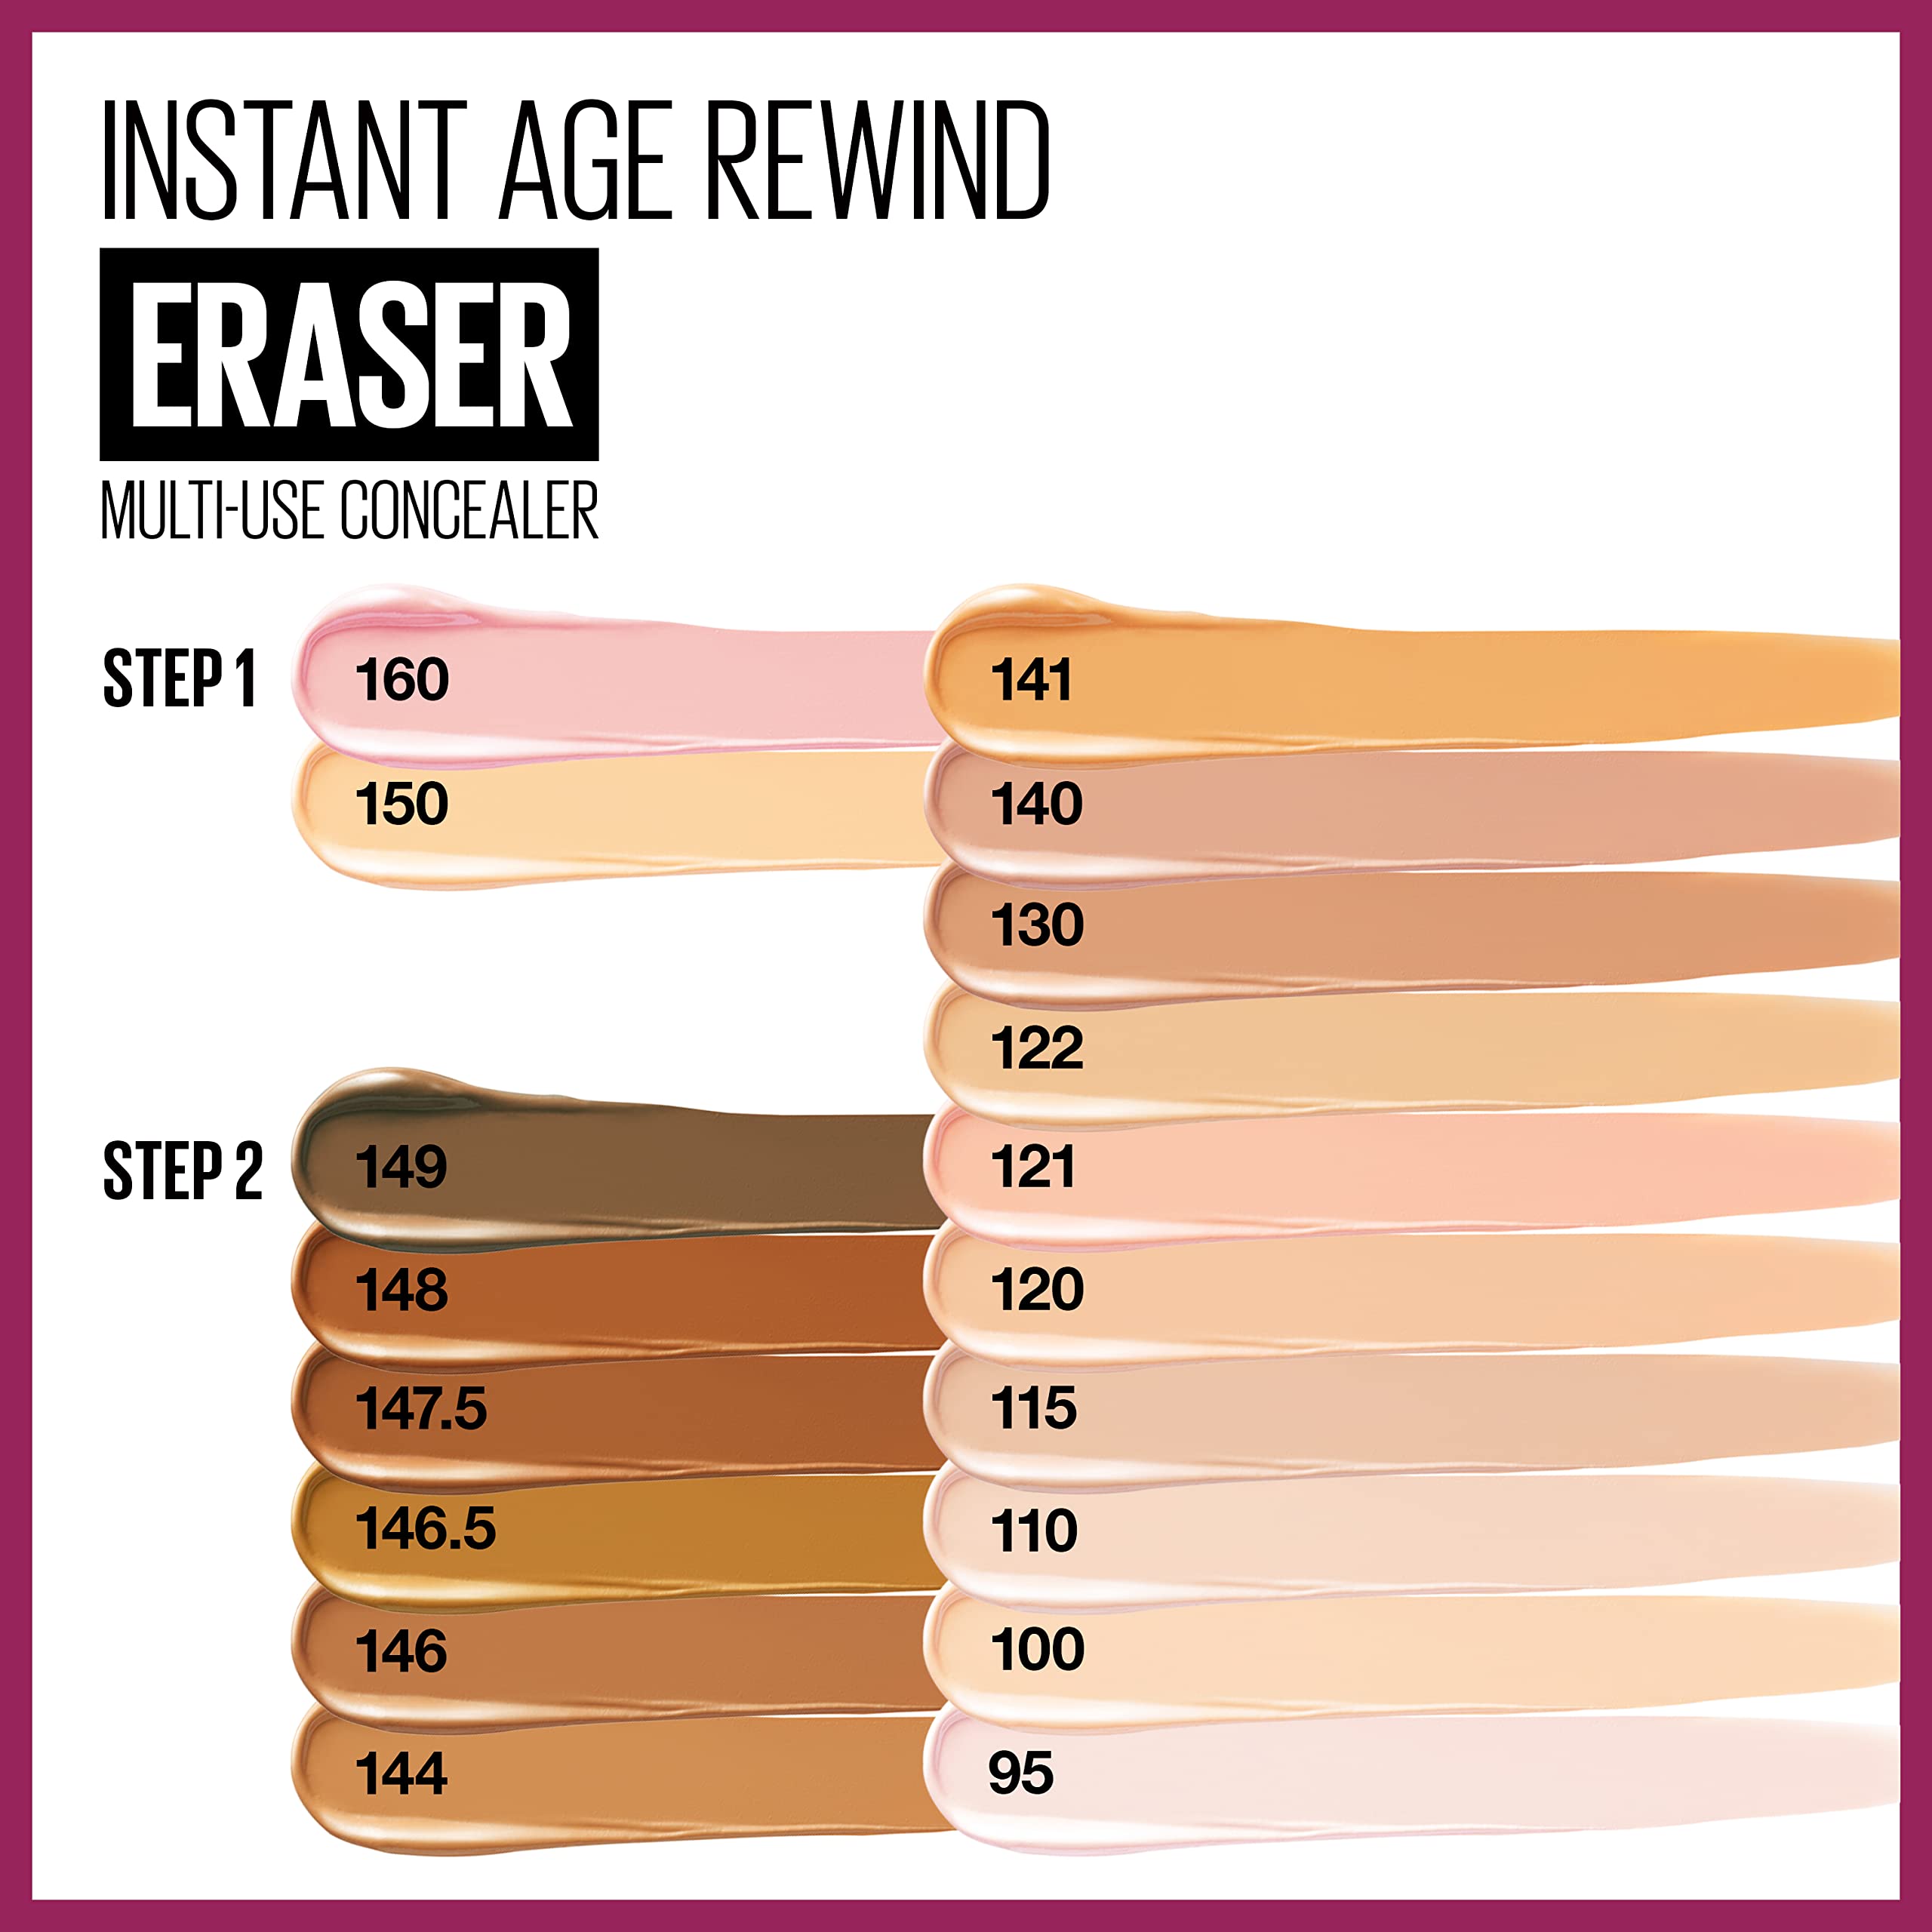 Maybelline Instant Age Rewind Eraser Dark Circles Treatment Multi-Use Concealer, 148, 1 Count (Packaging May Vary)